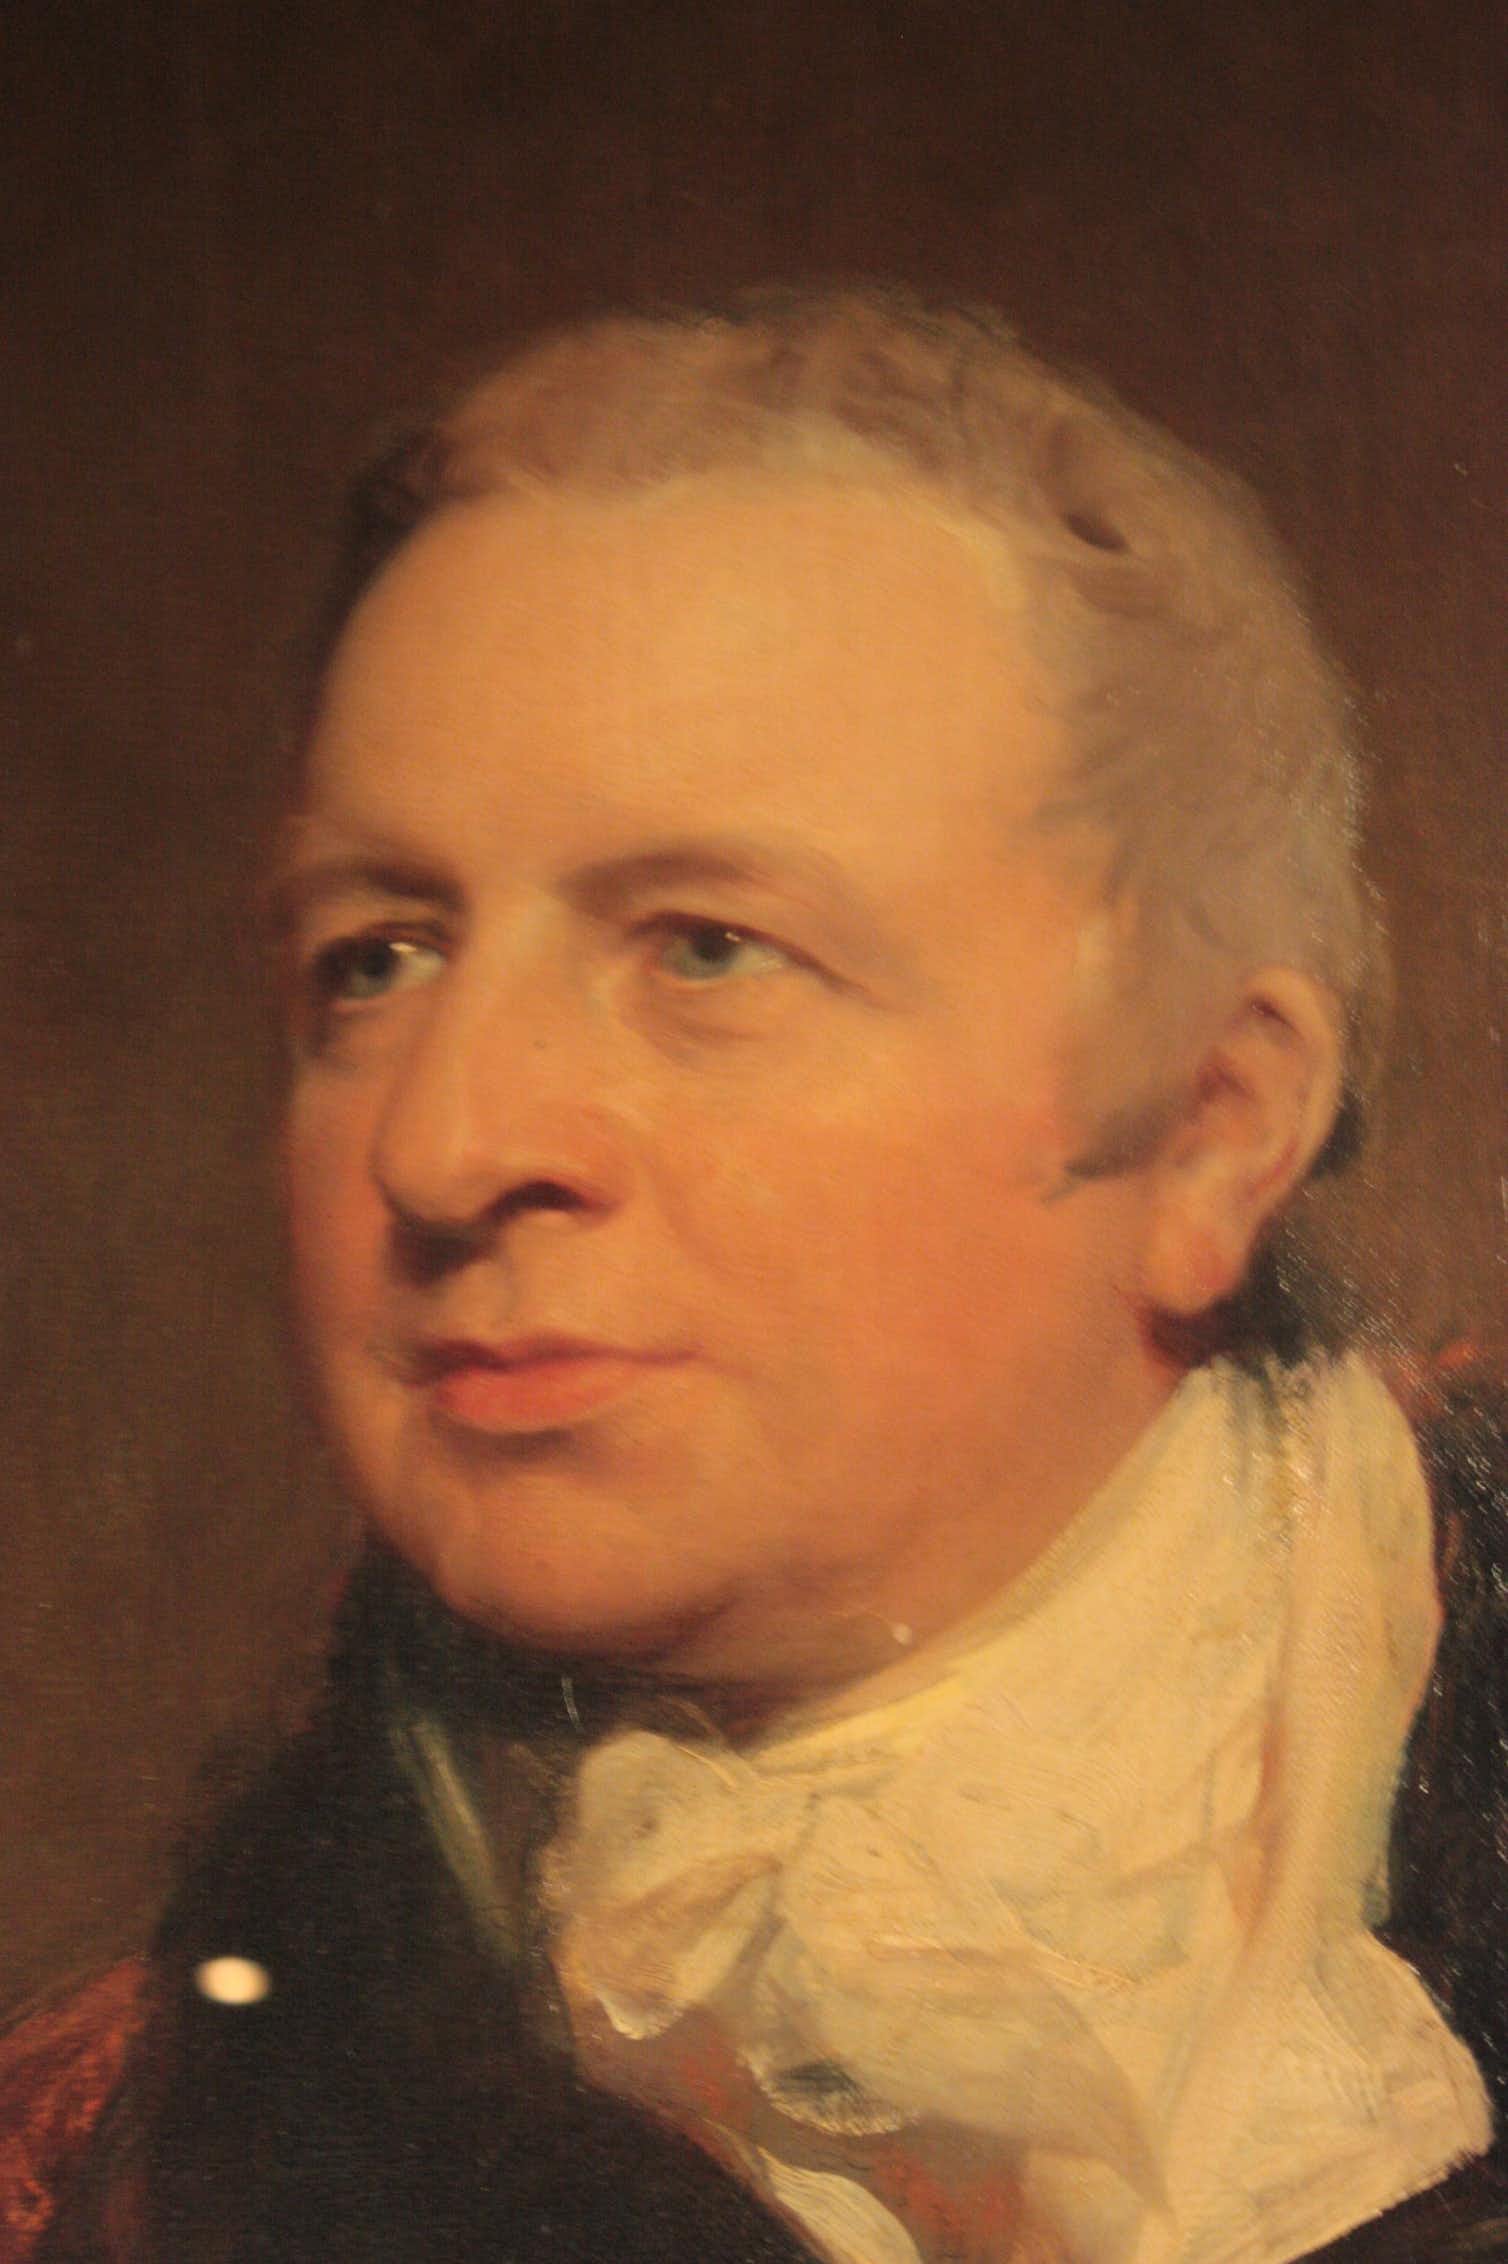 Old painting of a man with blue eyes and short gray hair wearing a ruffled collar shirt